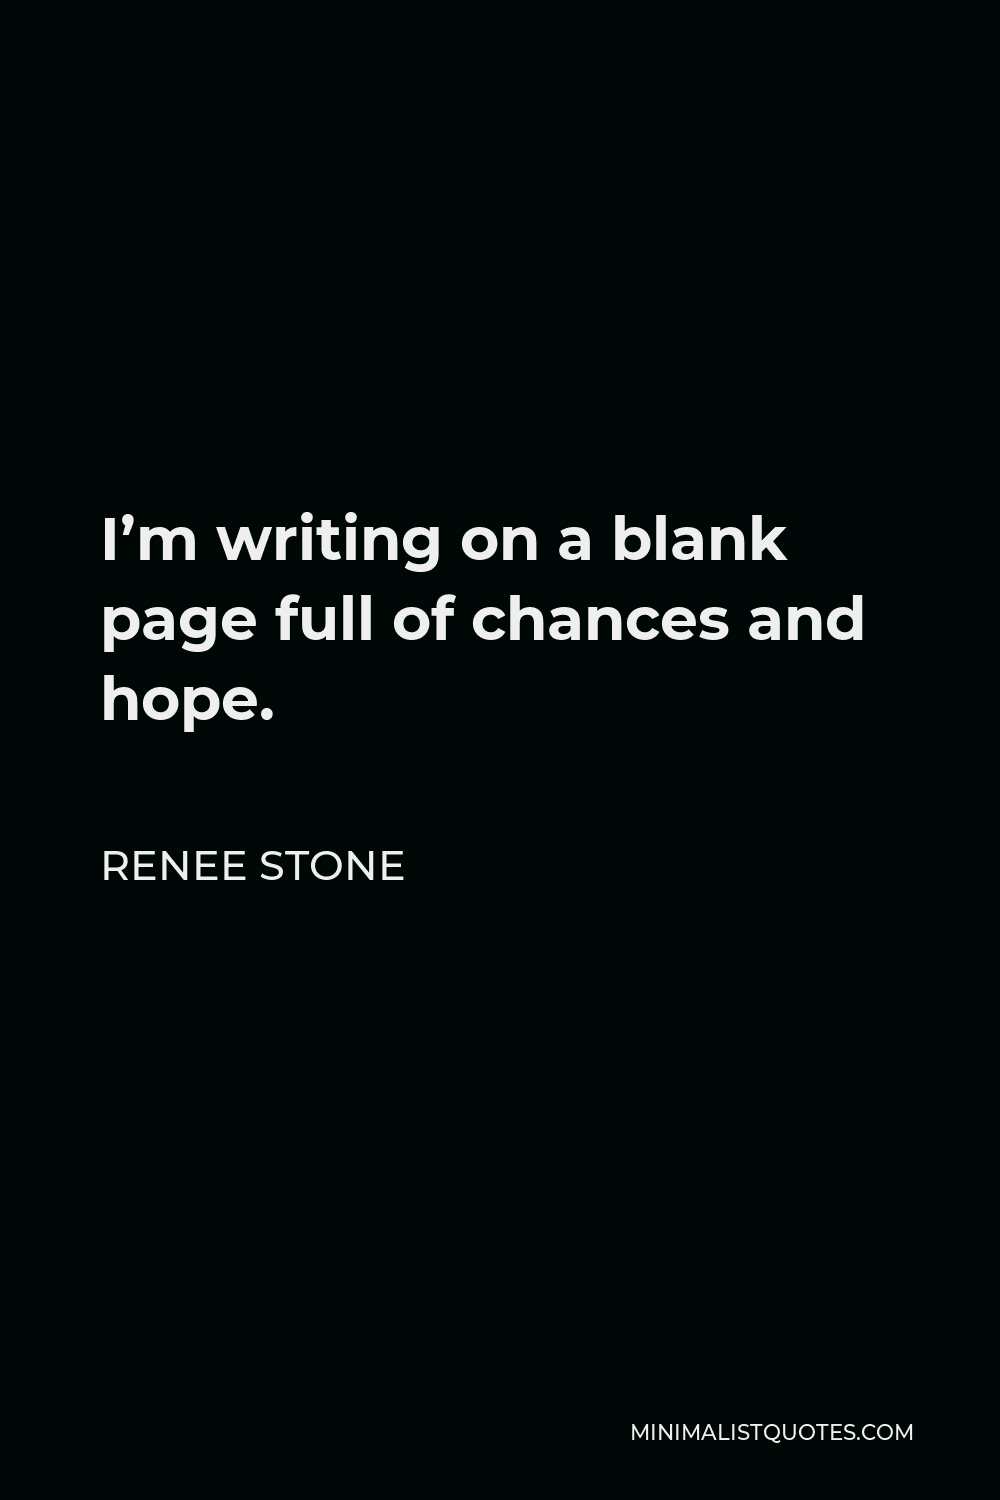 Renee Stone Quote - I’m writing on a blank page full of chances and hope.